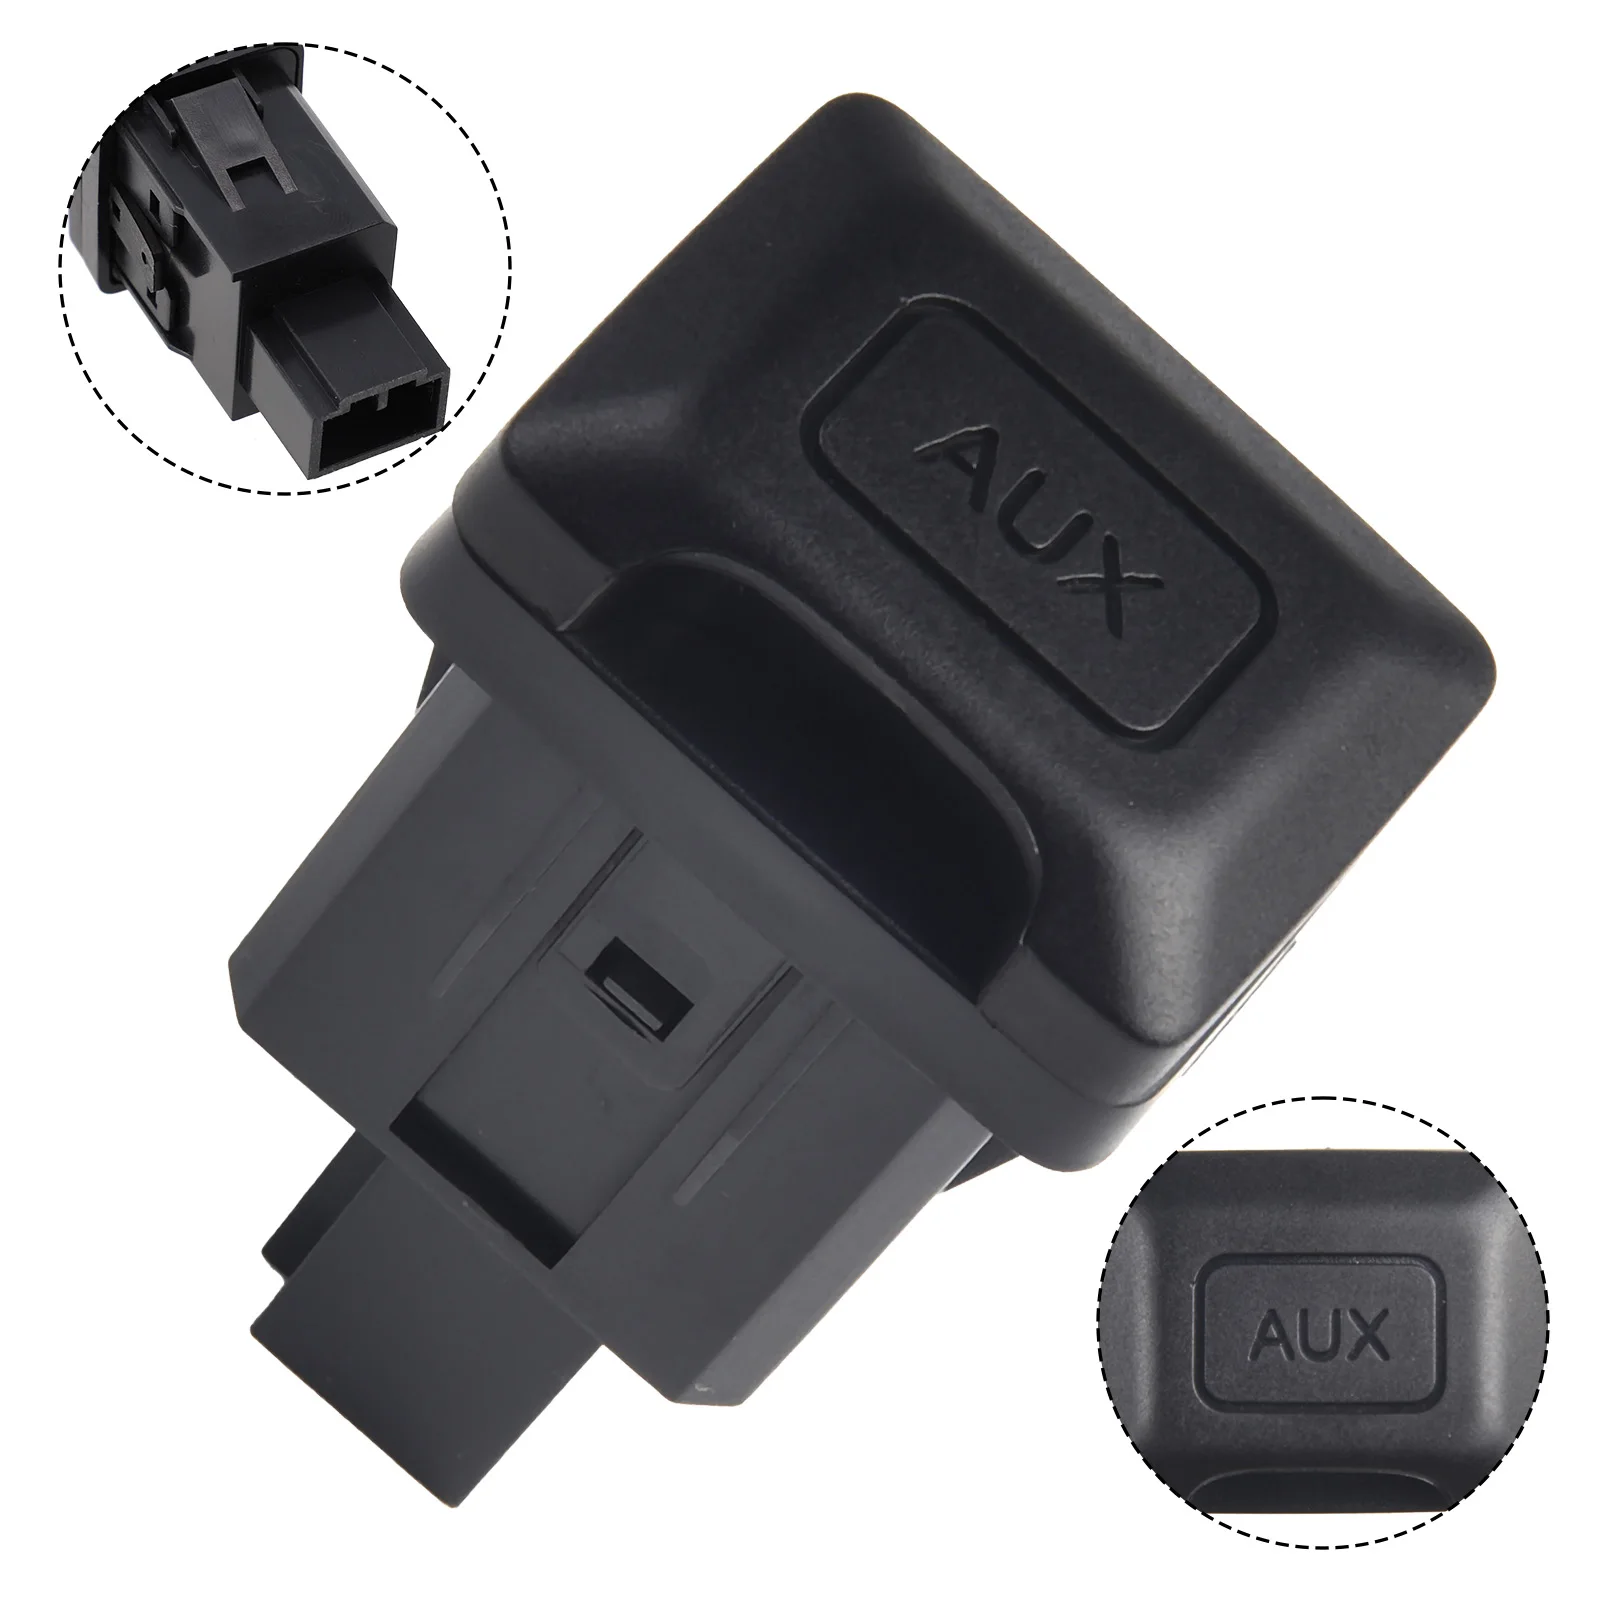 

For Honda For CRV 2009-2011 Auxiliary Input Plug Adapter Parts Plastic Replacement Vehicle 1pc 39112-SNA-A01 39112SNAA01 5PIN